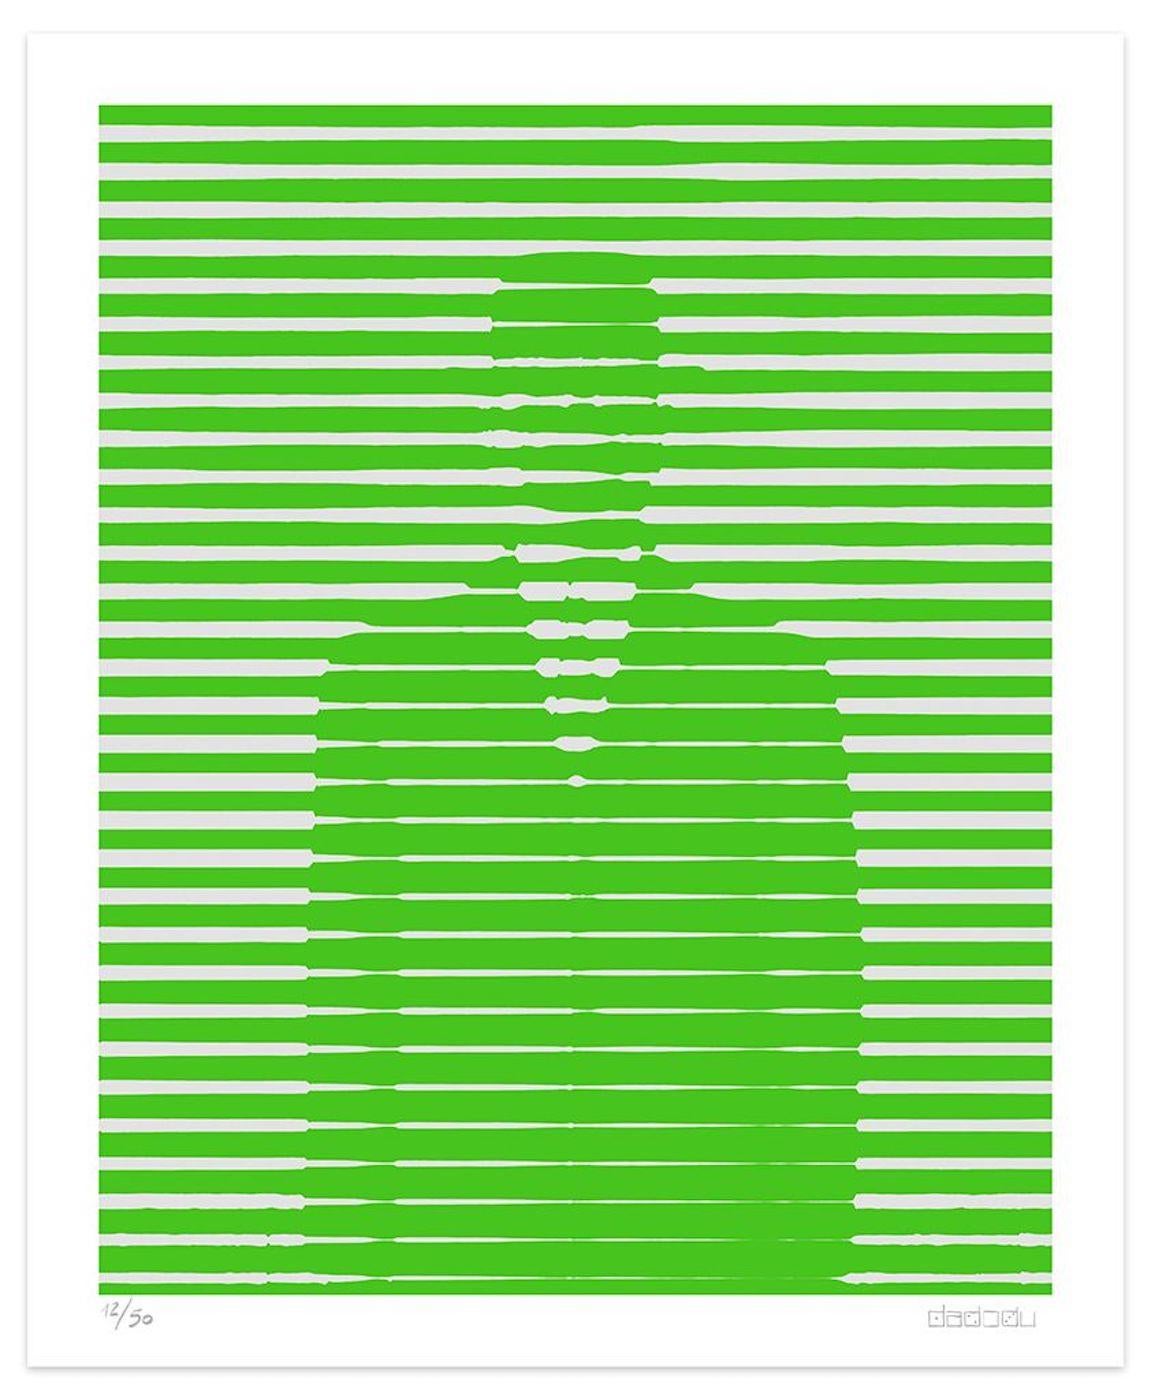 Green and Grey Lines - Giclée Print by Dadodu - 2016